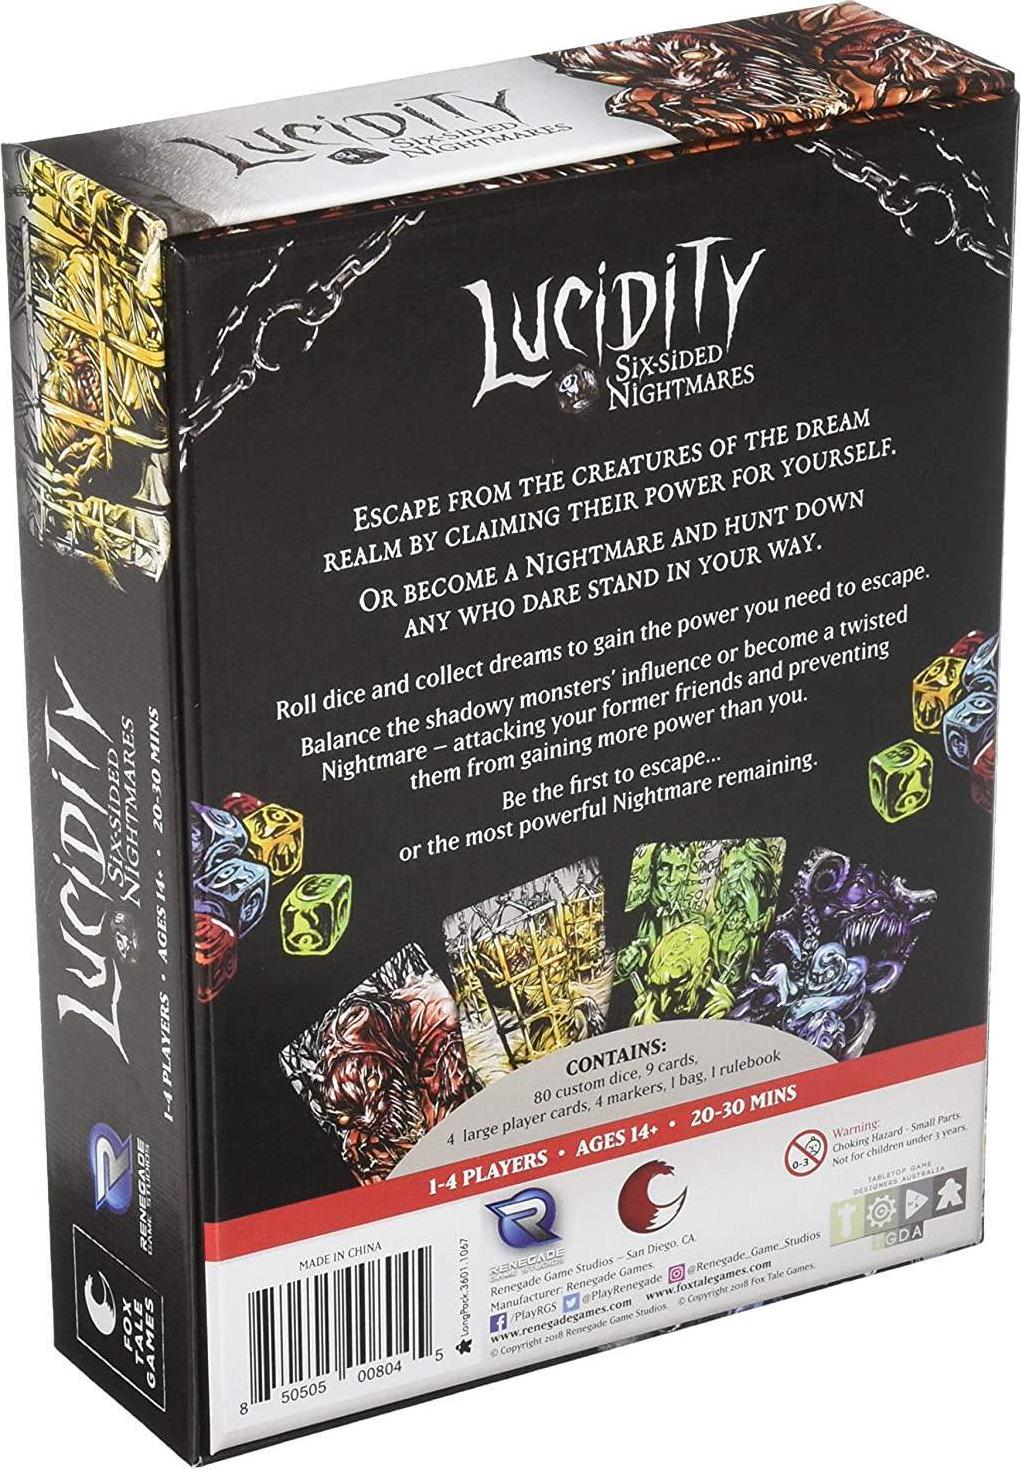 Renegade Game Studios, Lucidity Six-Sided Nightmares Dice Game